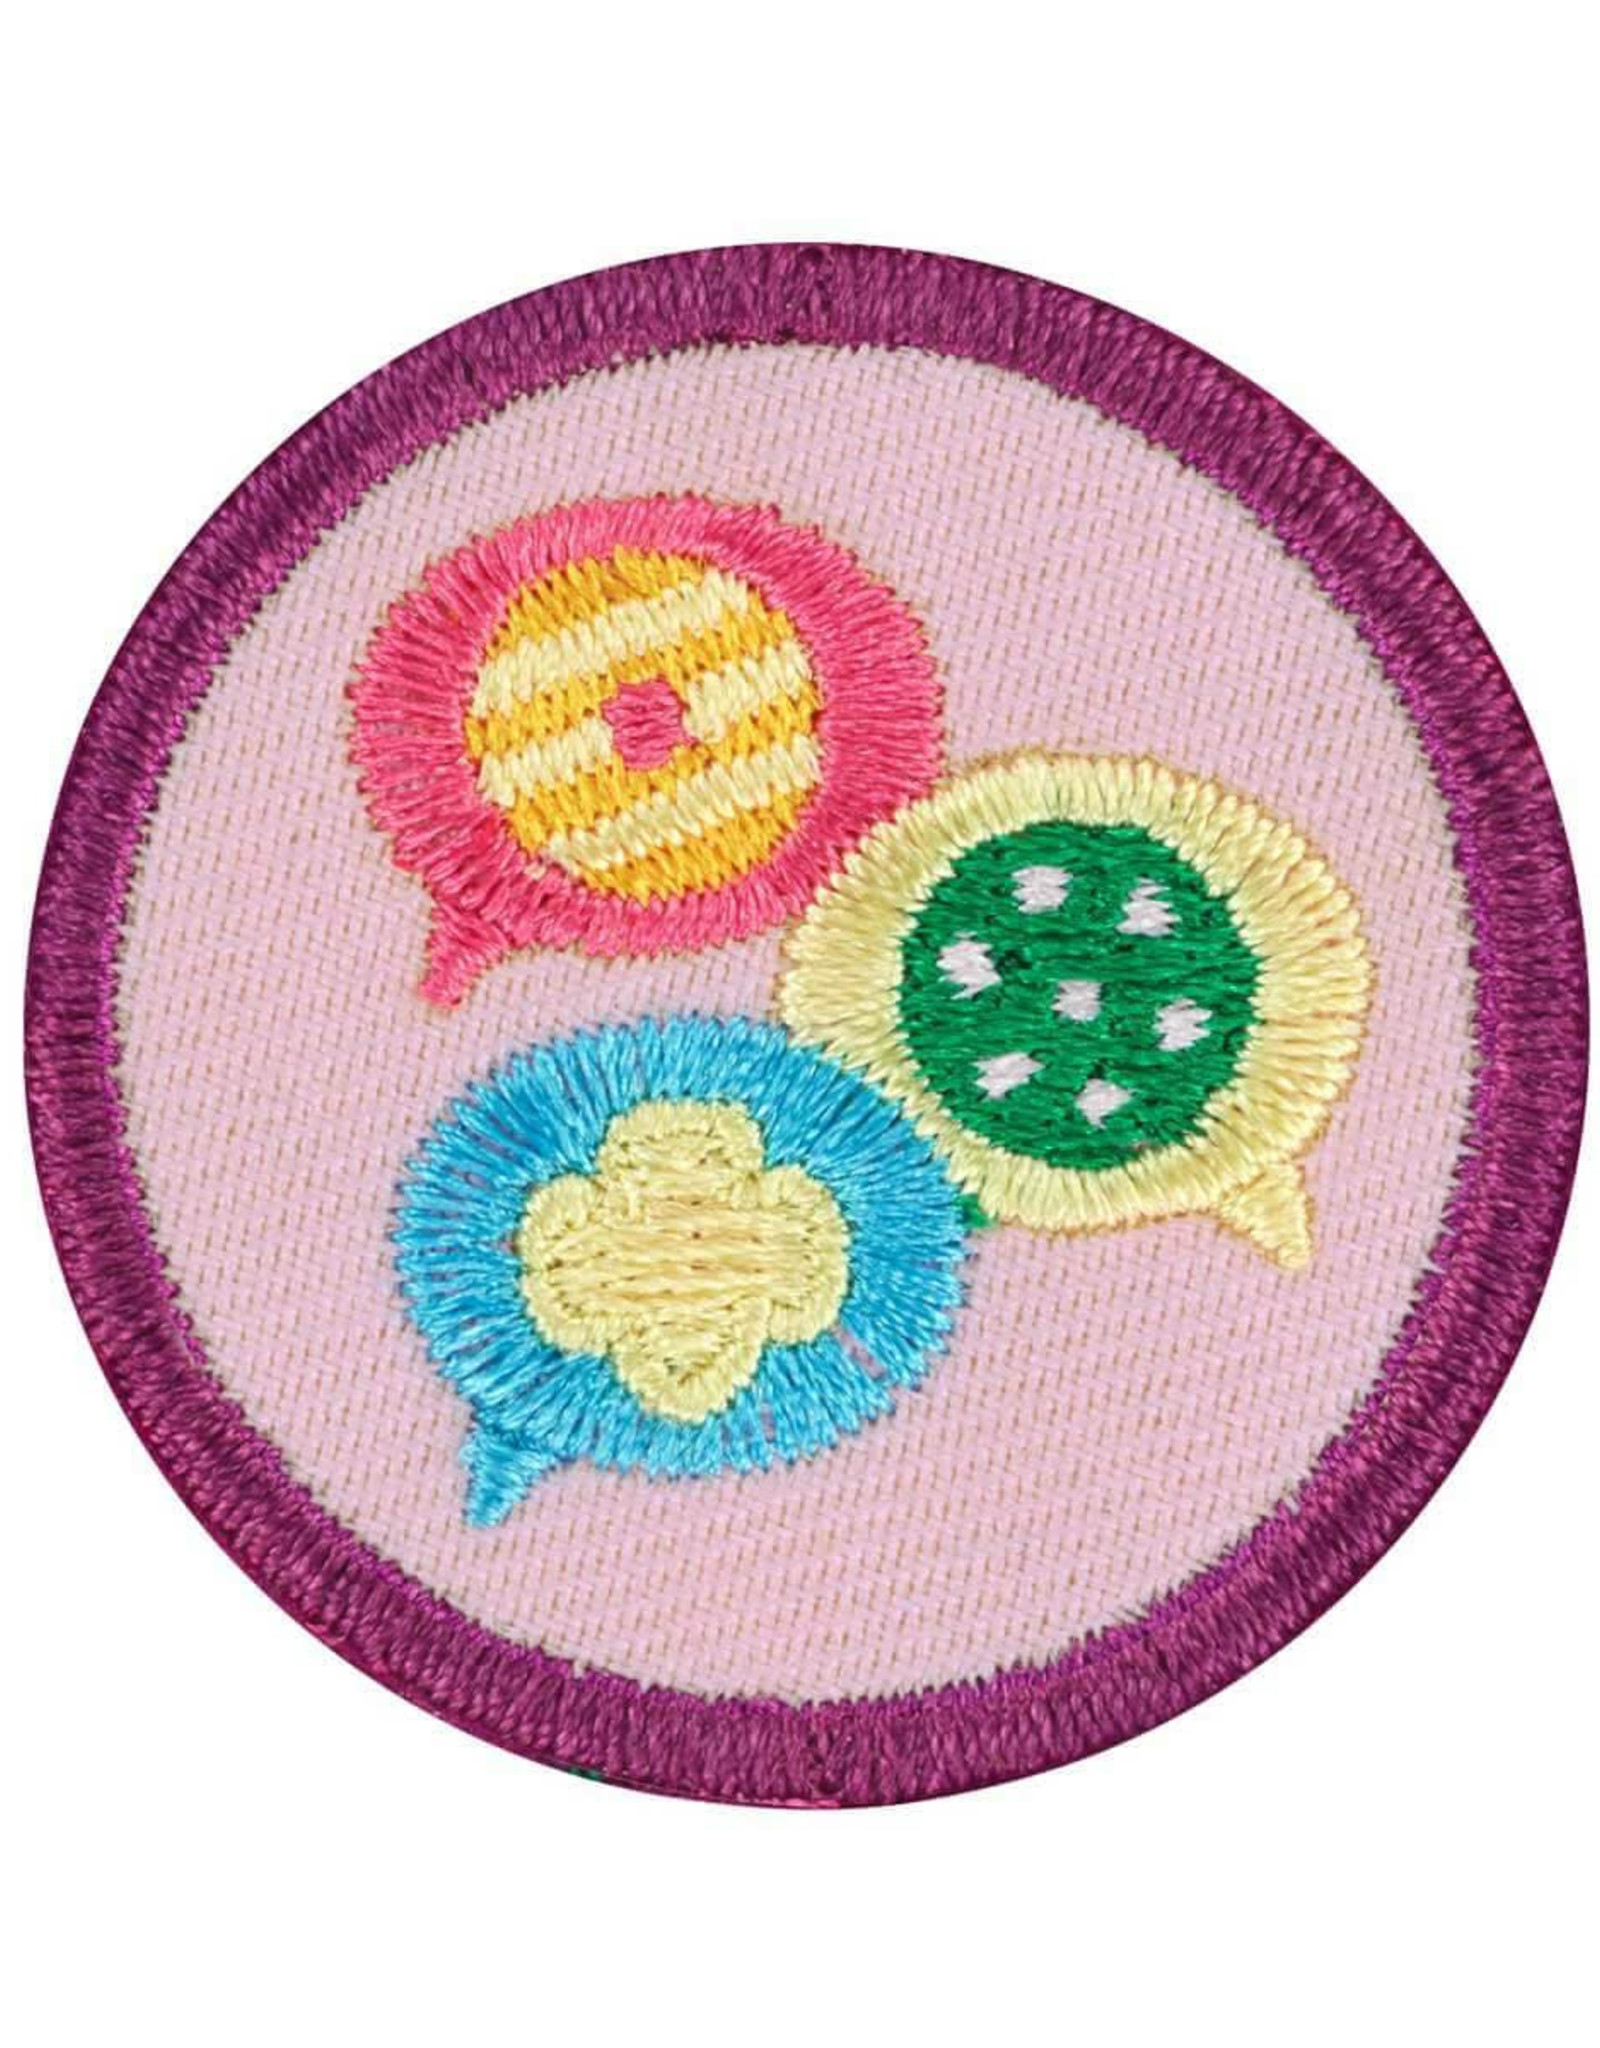 GIRL SCOUTS OF THE USA Junior Cookie Collaborator Badge